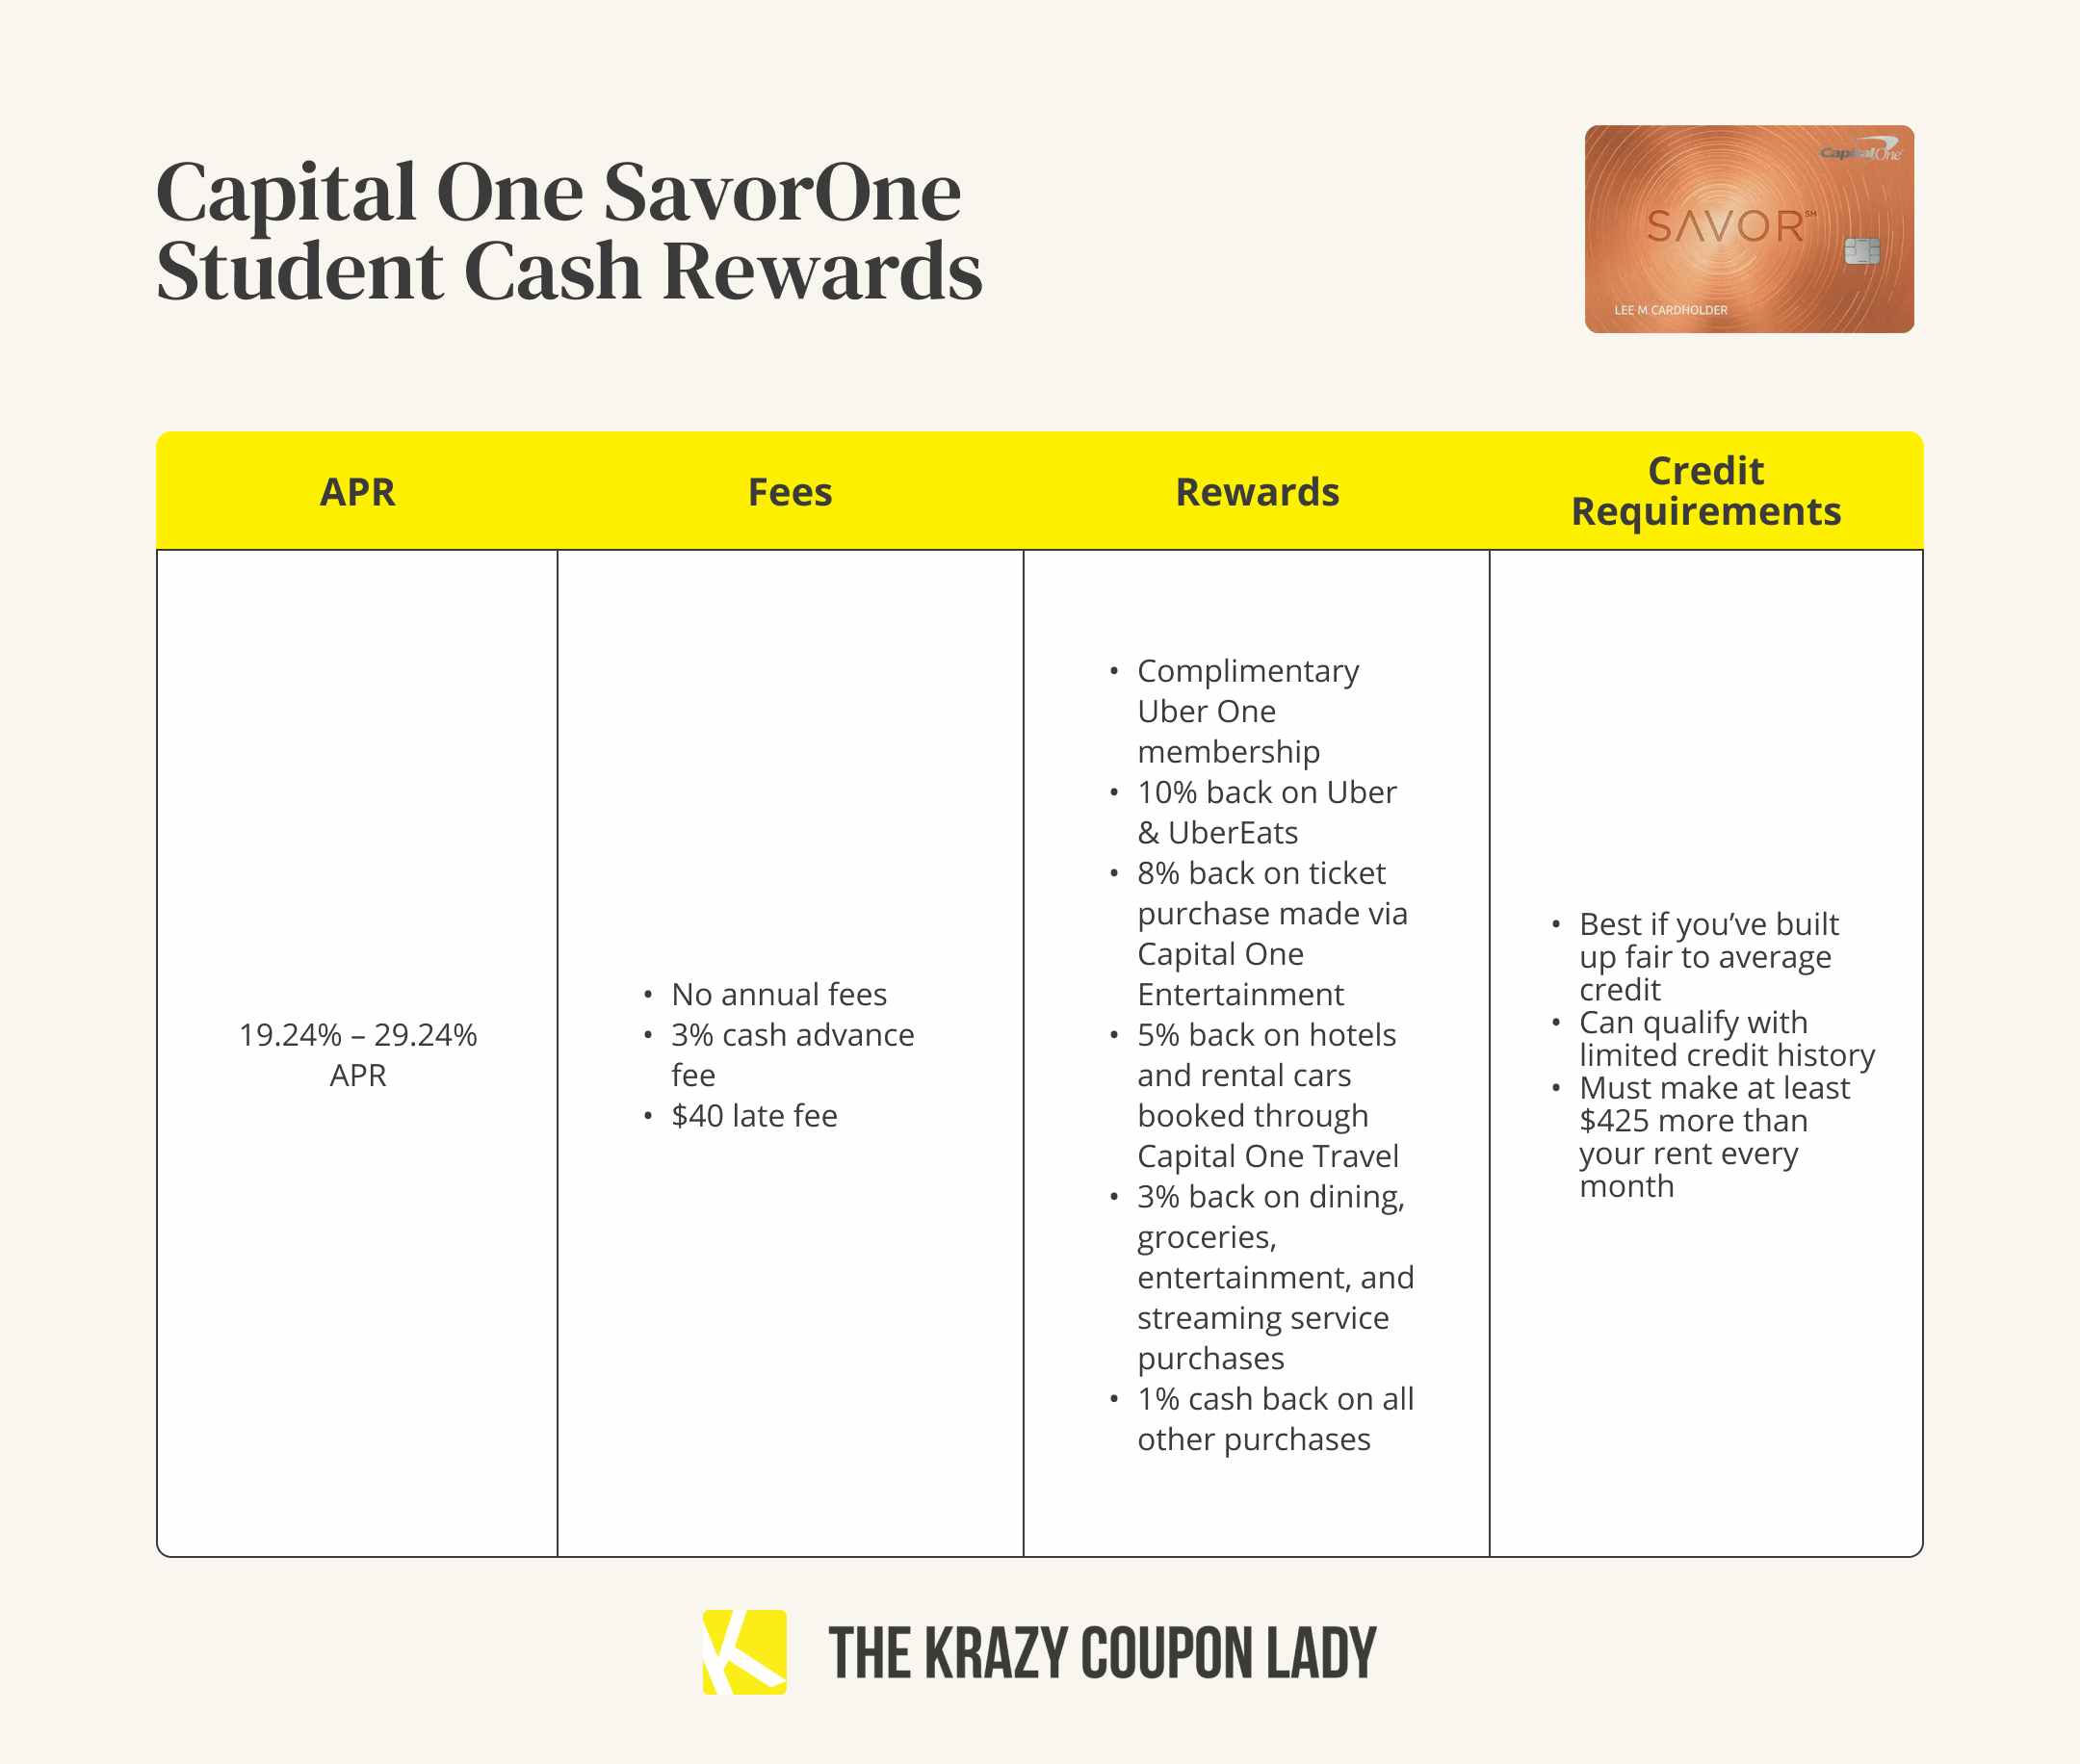 A graphic showing the APR, fees, rewards, and credit requirements for a Capital One SavorOne student cash rewards credit card